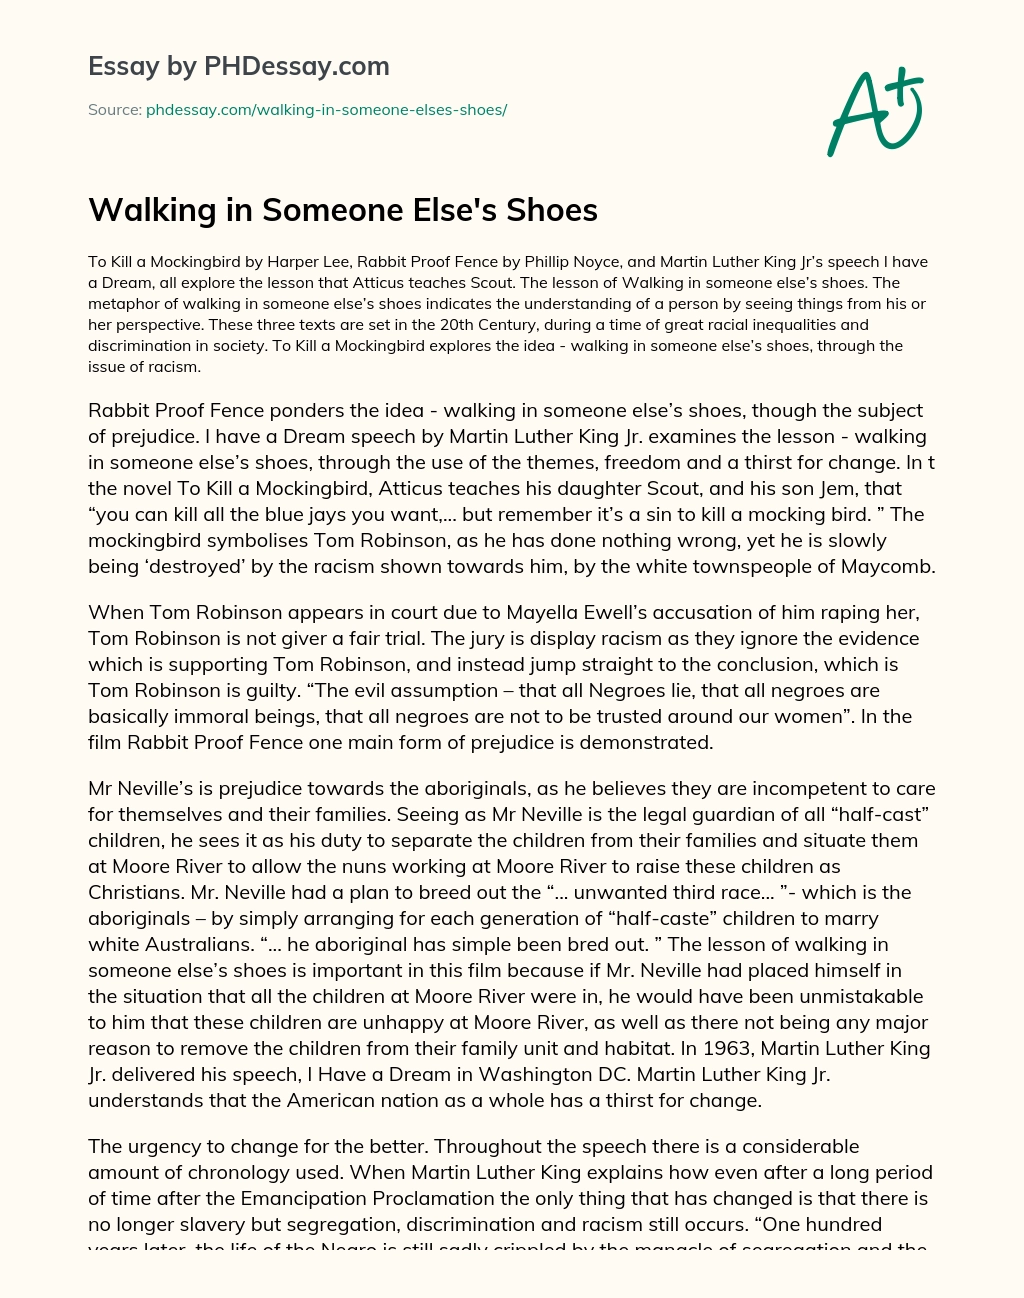 Walking in Someone Else’s Shoes essay